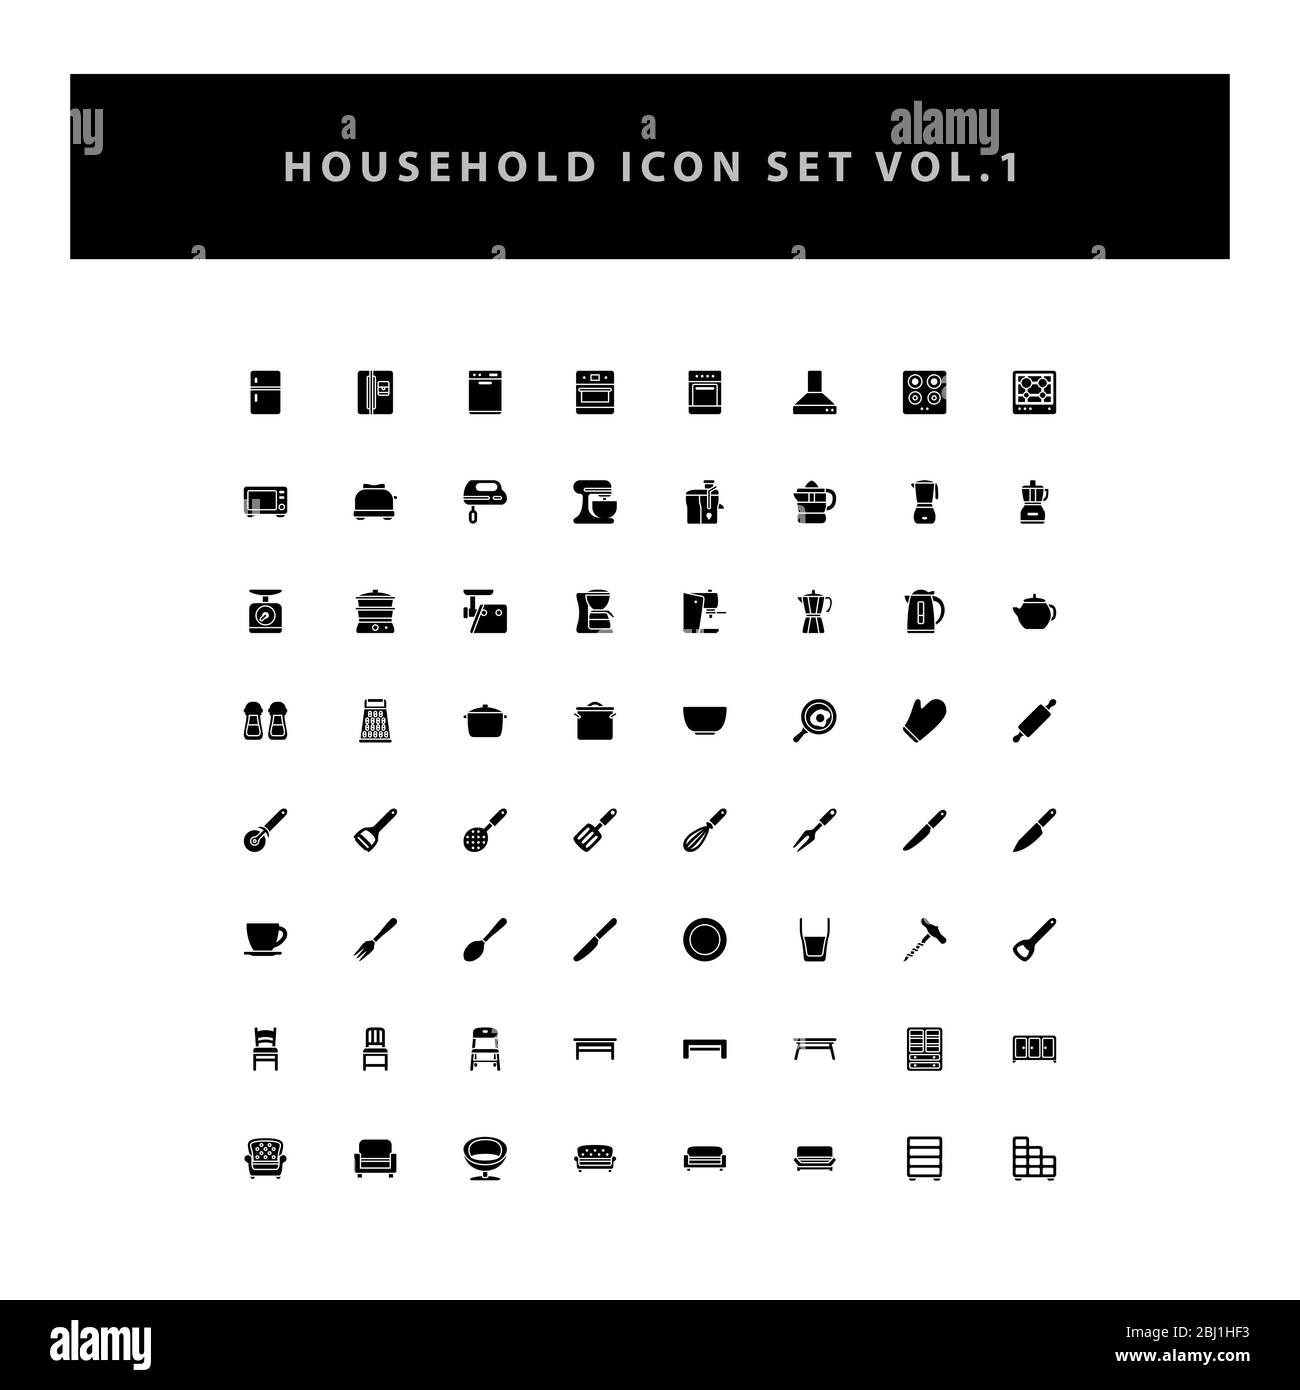 household appliances vector icons set vol 1 with glyph style design Stock Vector